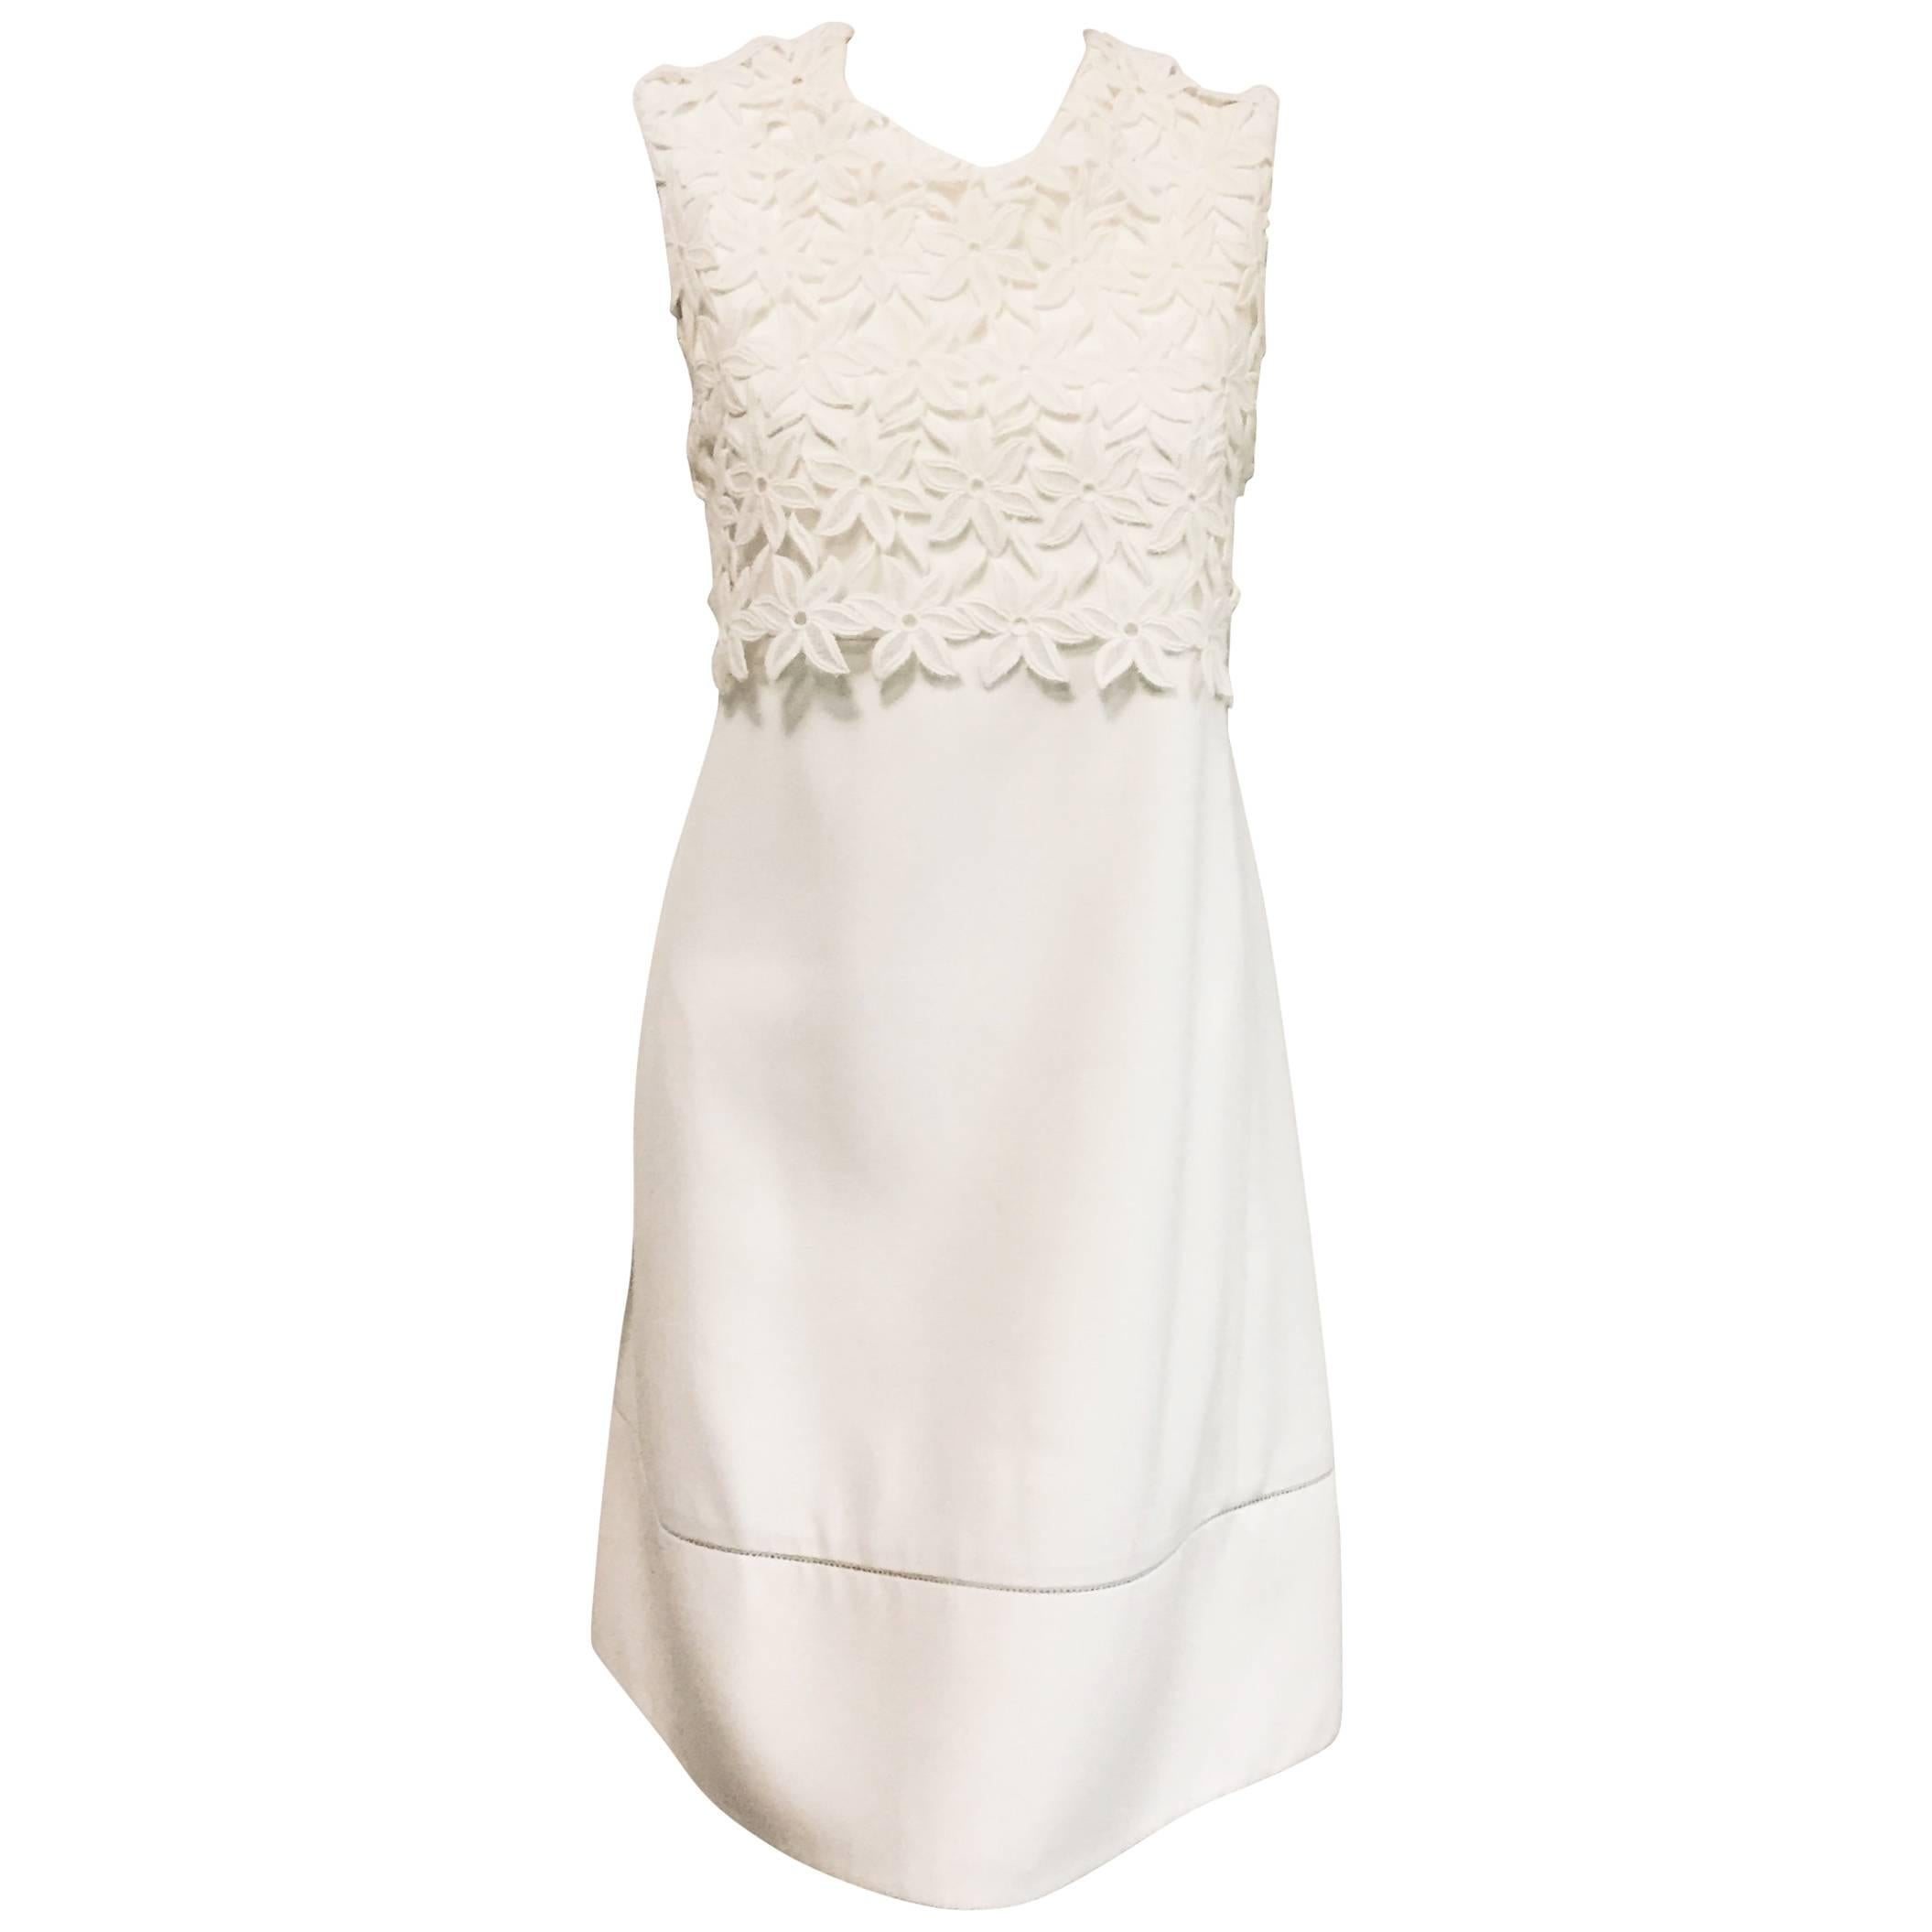 Classic Chloe Floral Lace Sleeveless White Cotton Dress For Sale